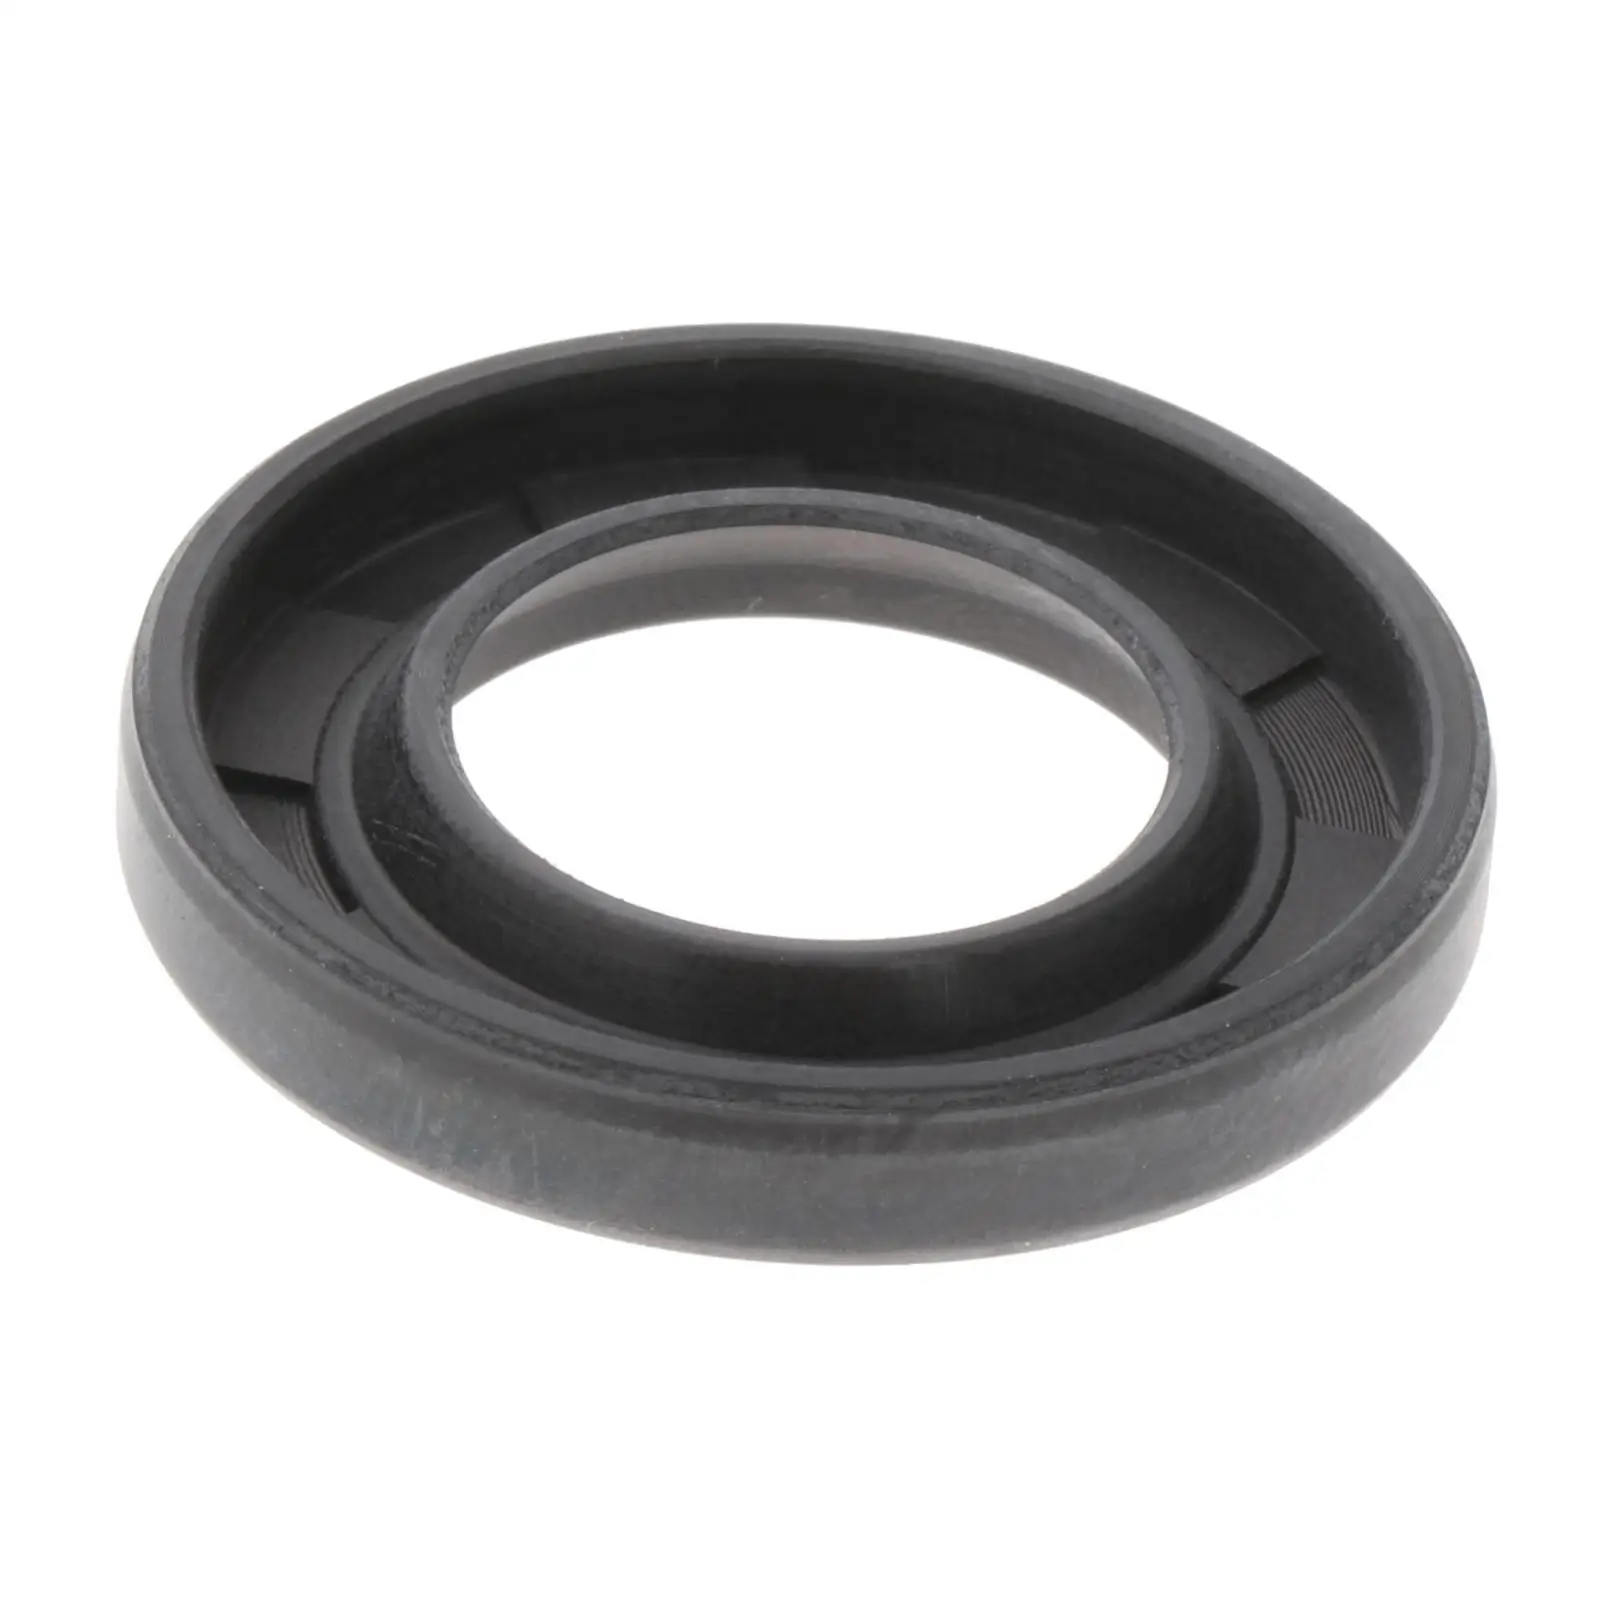 Marine Oil Seal Fit for Outboard 60HP 70HP Outboard Engine 2T 3cyl